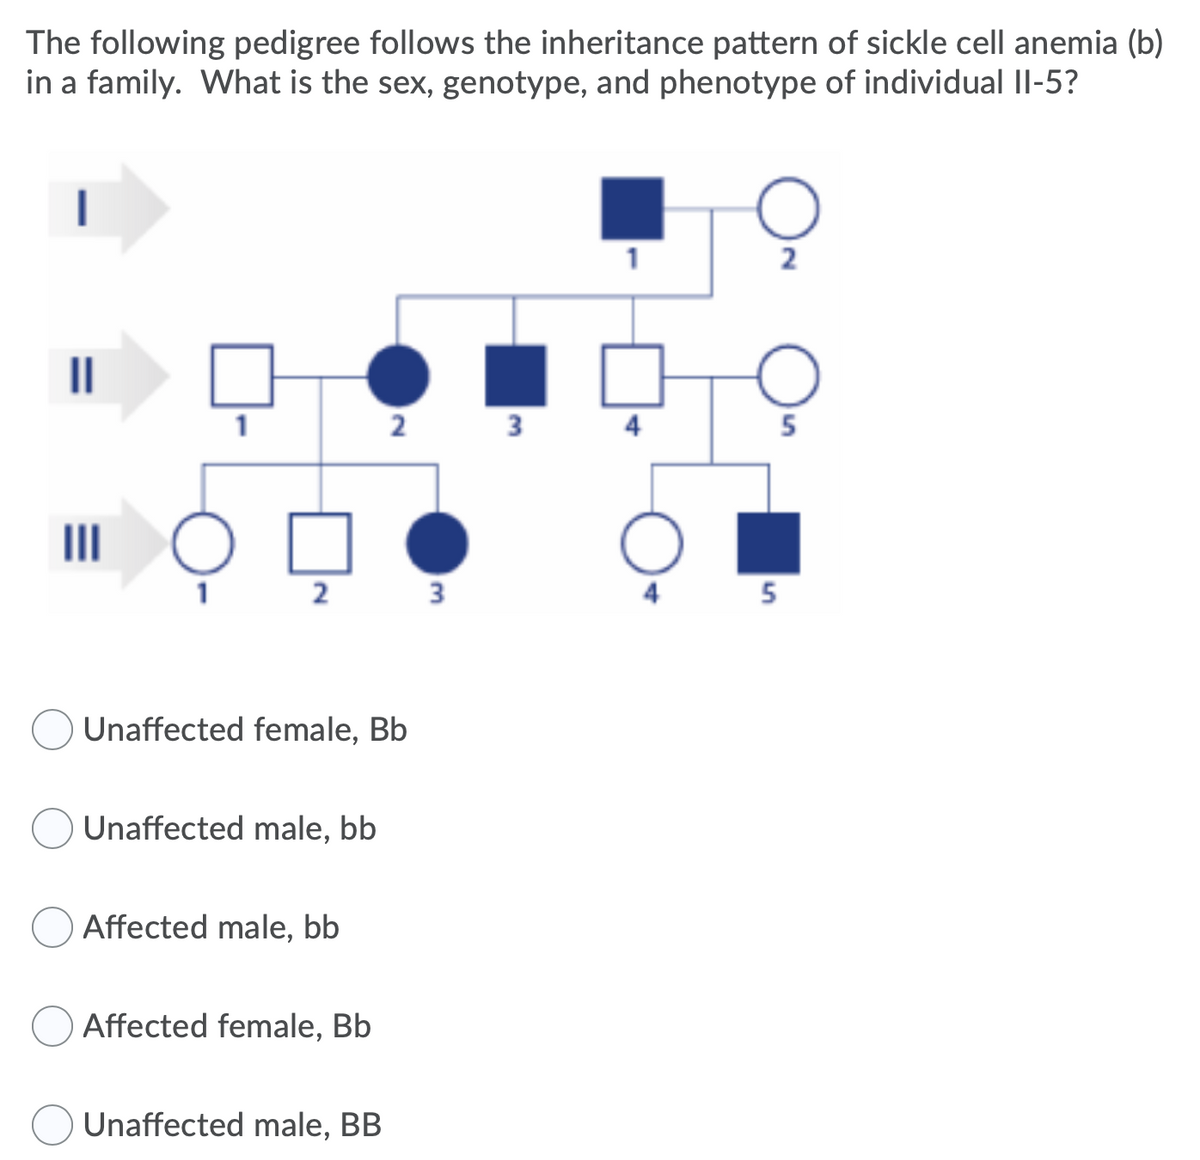 The following pedigree follows the inheritance pattern of sickle cell anemia (b)
in a family. What is the sex, genotype, and phenotype of individual II-5?
1
II
2 3
5
2
3
4
5
Unaffected female, Bb
Unaffected male, bb
Affected male, bb
Affected female, Bb
Unaffected male, BB
